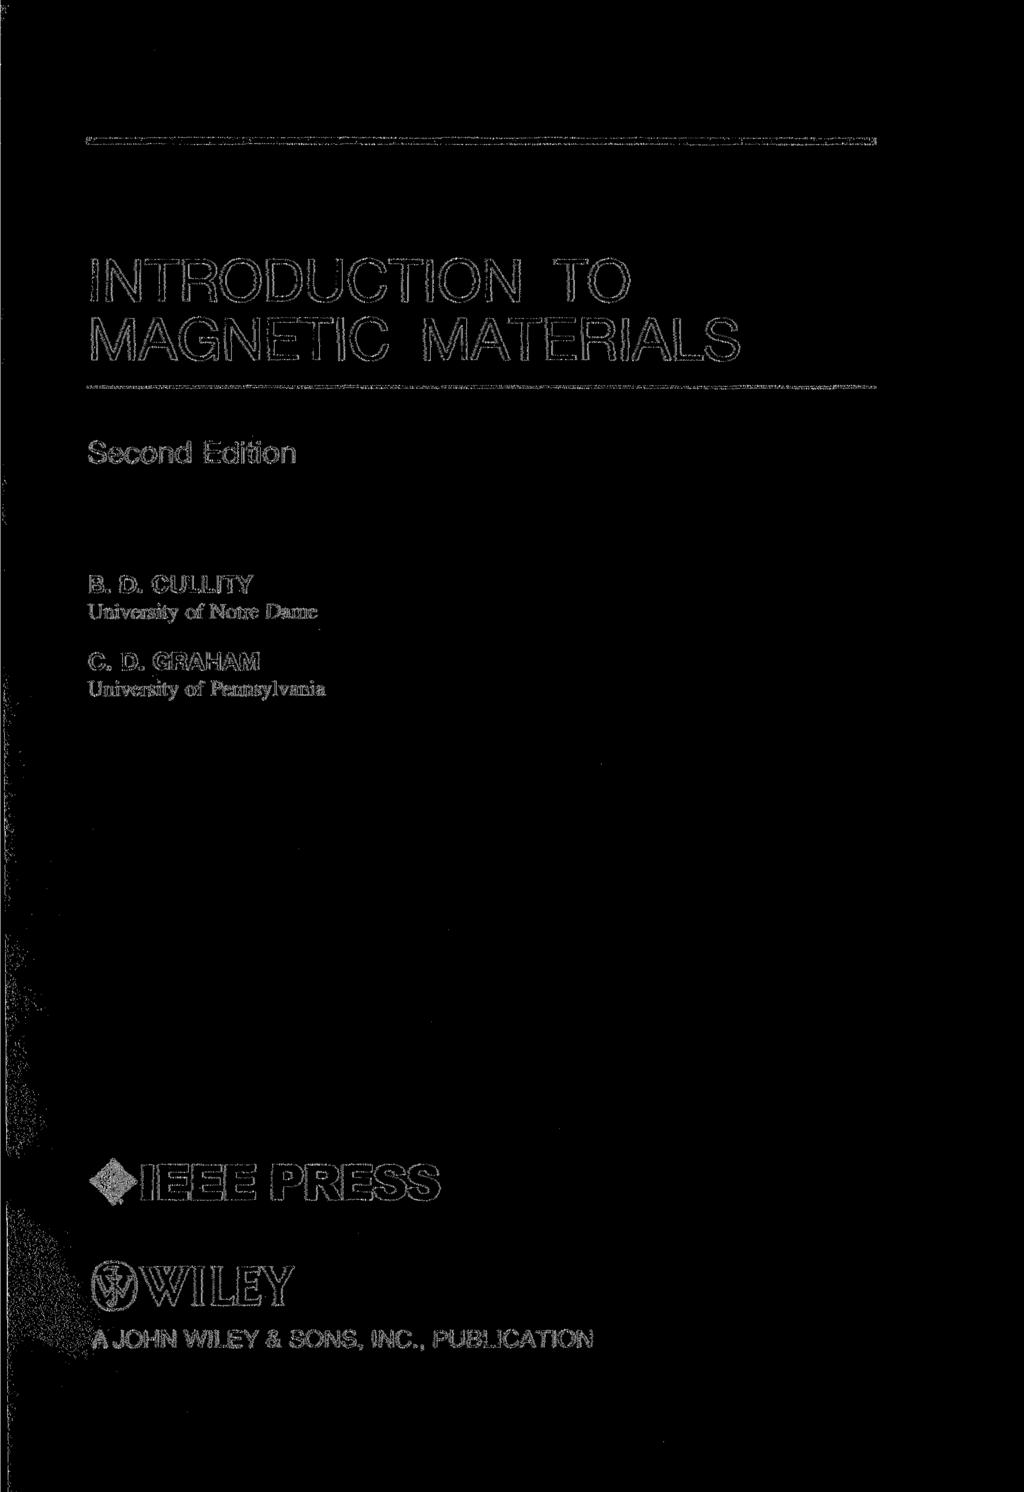 INTRODUCTION TO MAGNETIC MATERIALS Second Edition B. D. CULLITY University of Notre Dame С D.